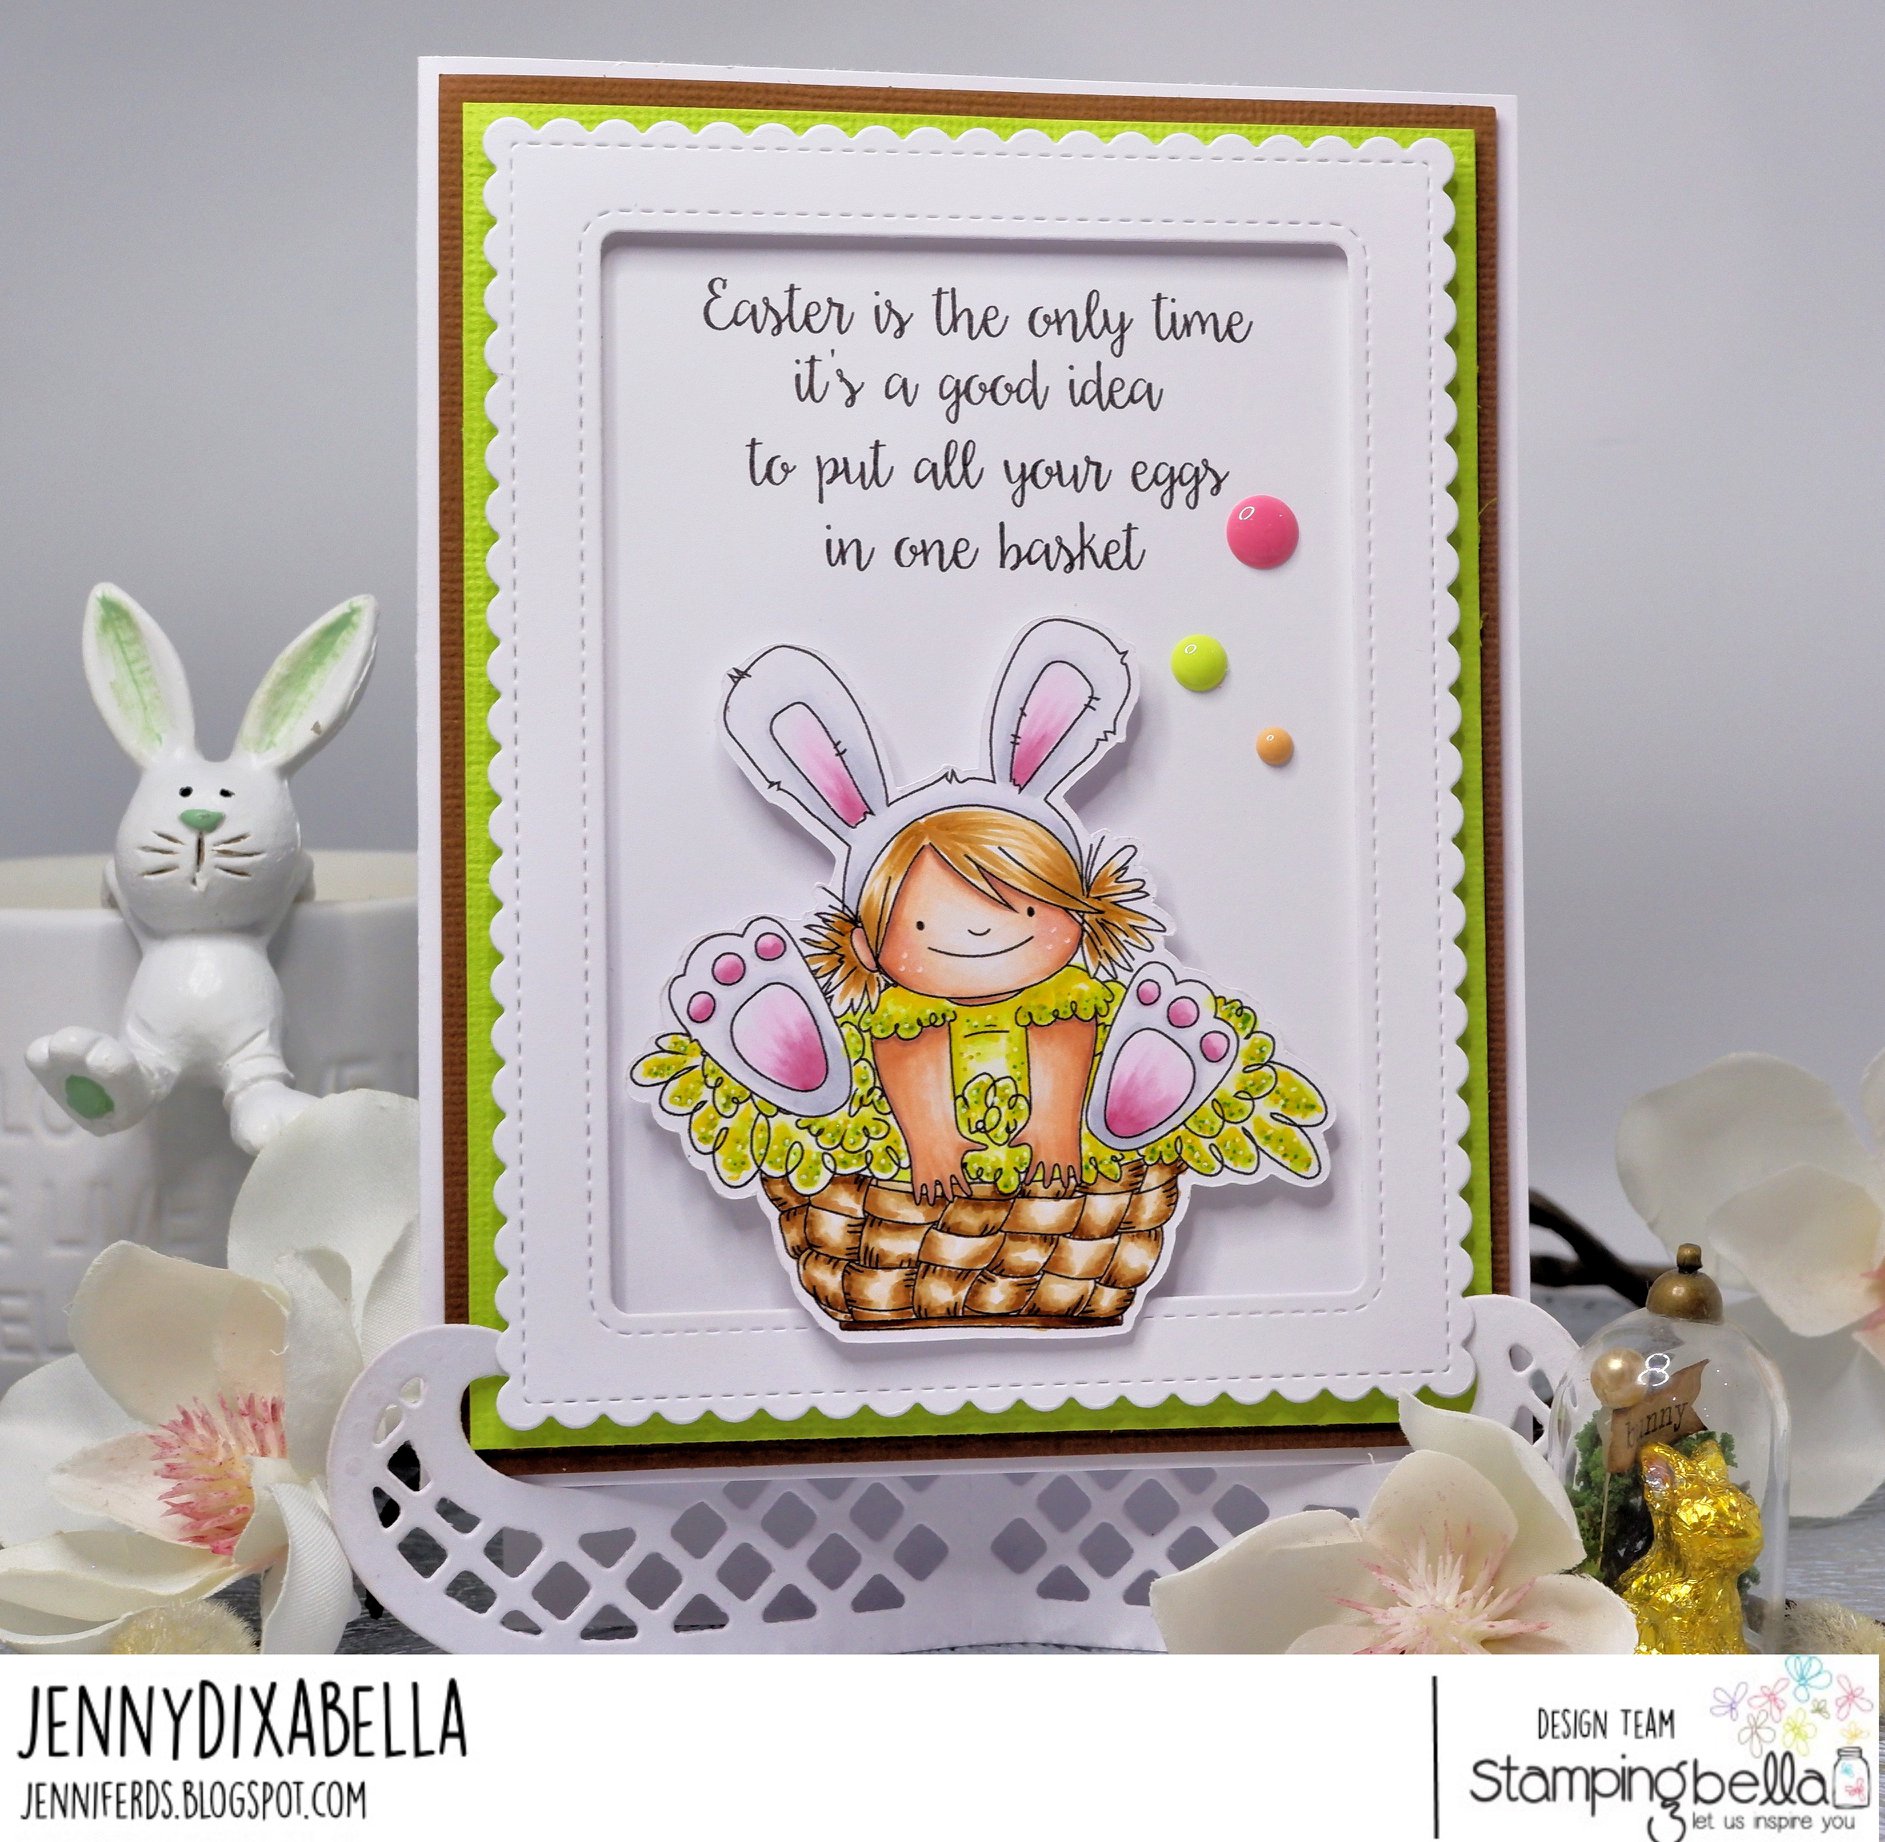 www.stampingbella.com: rubber stamp used: SQUIDGY in a BASKET . card by Jenny Dix